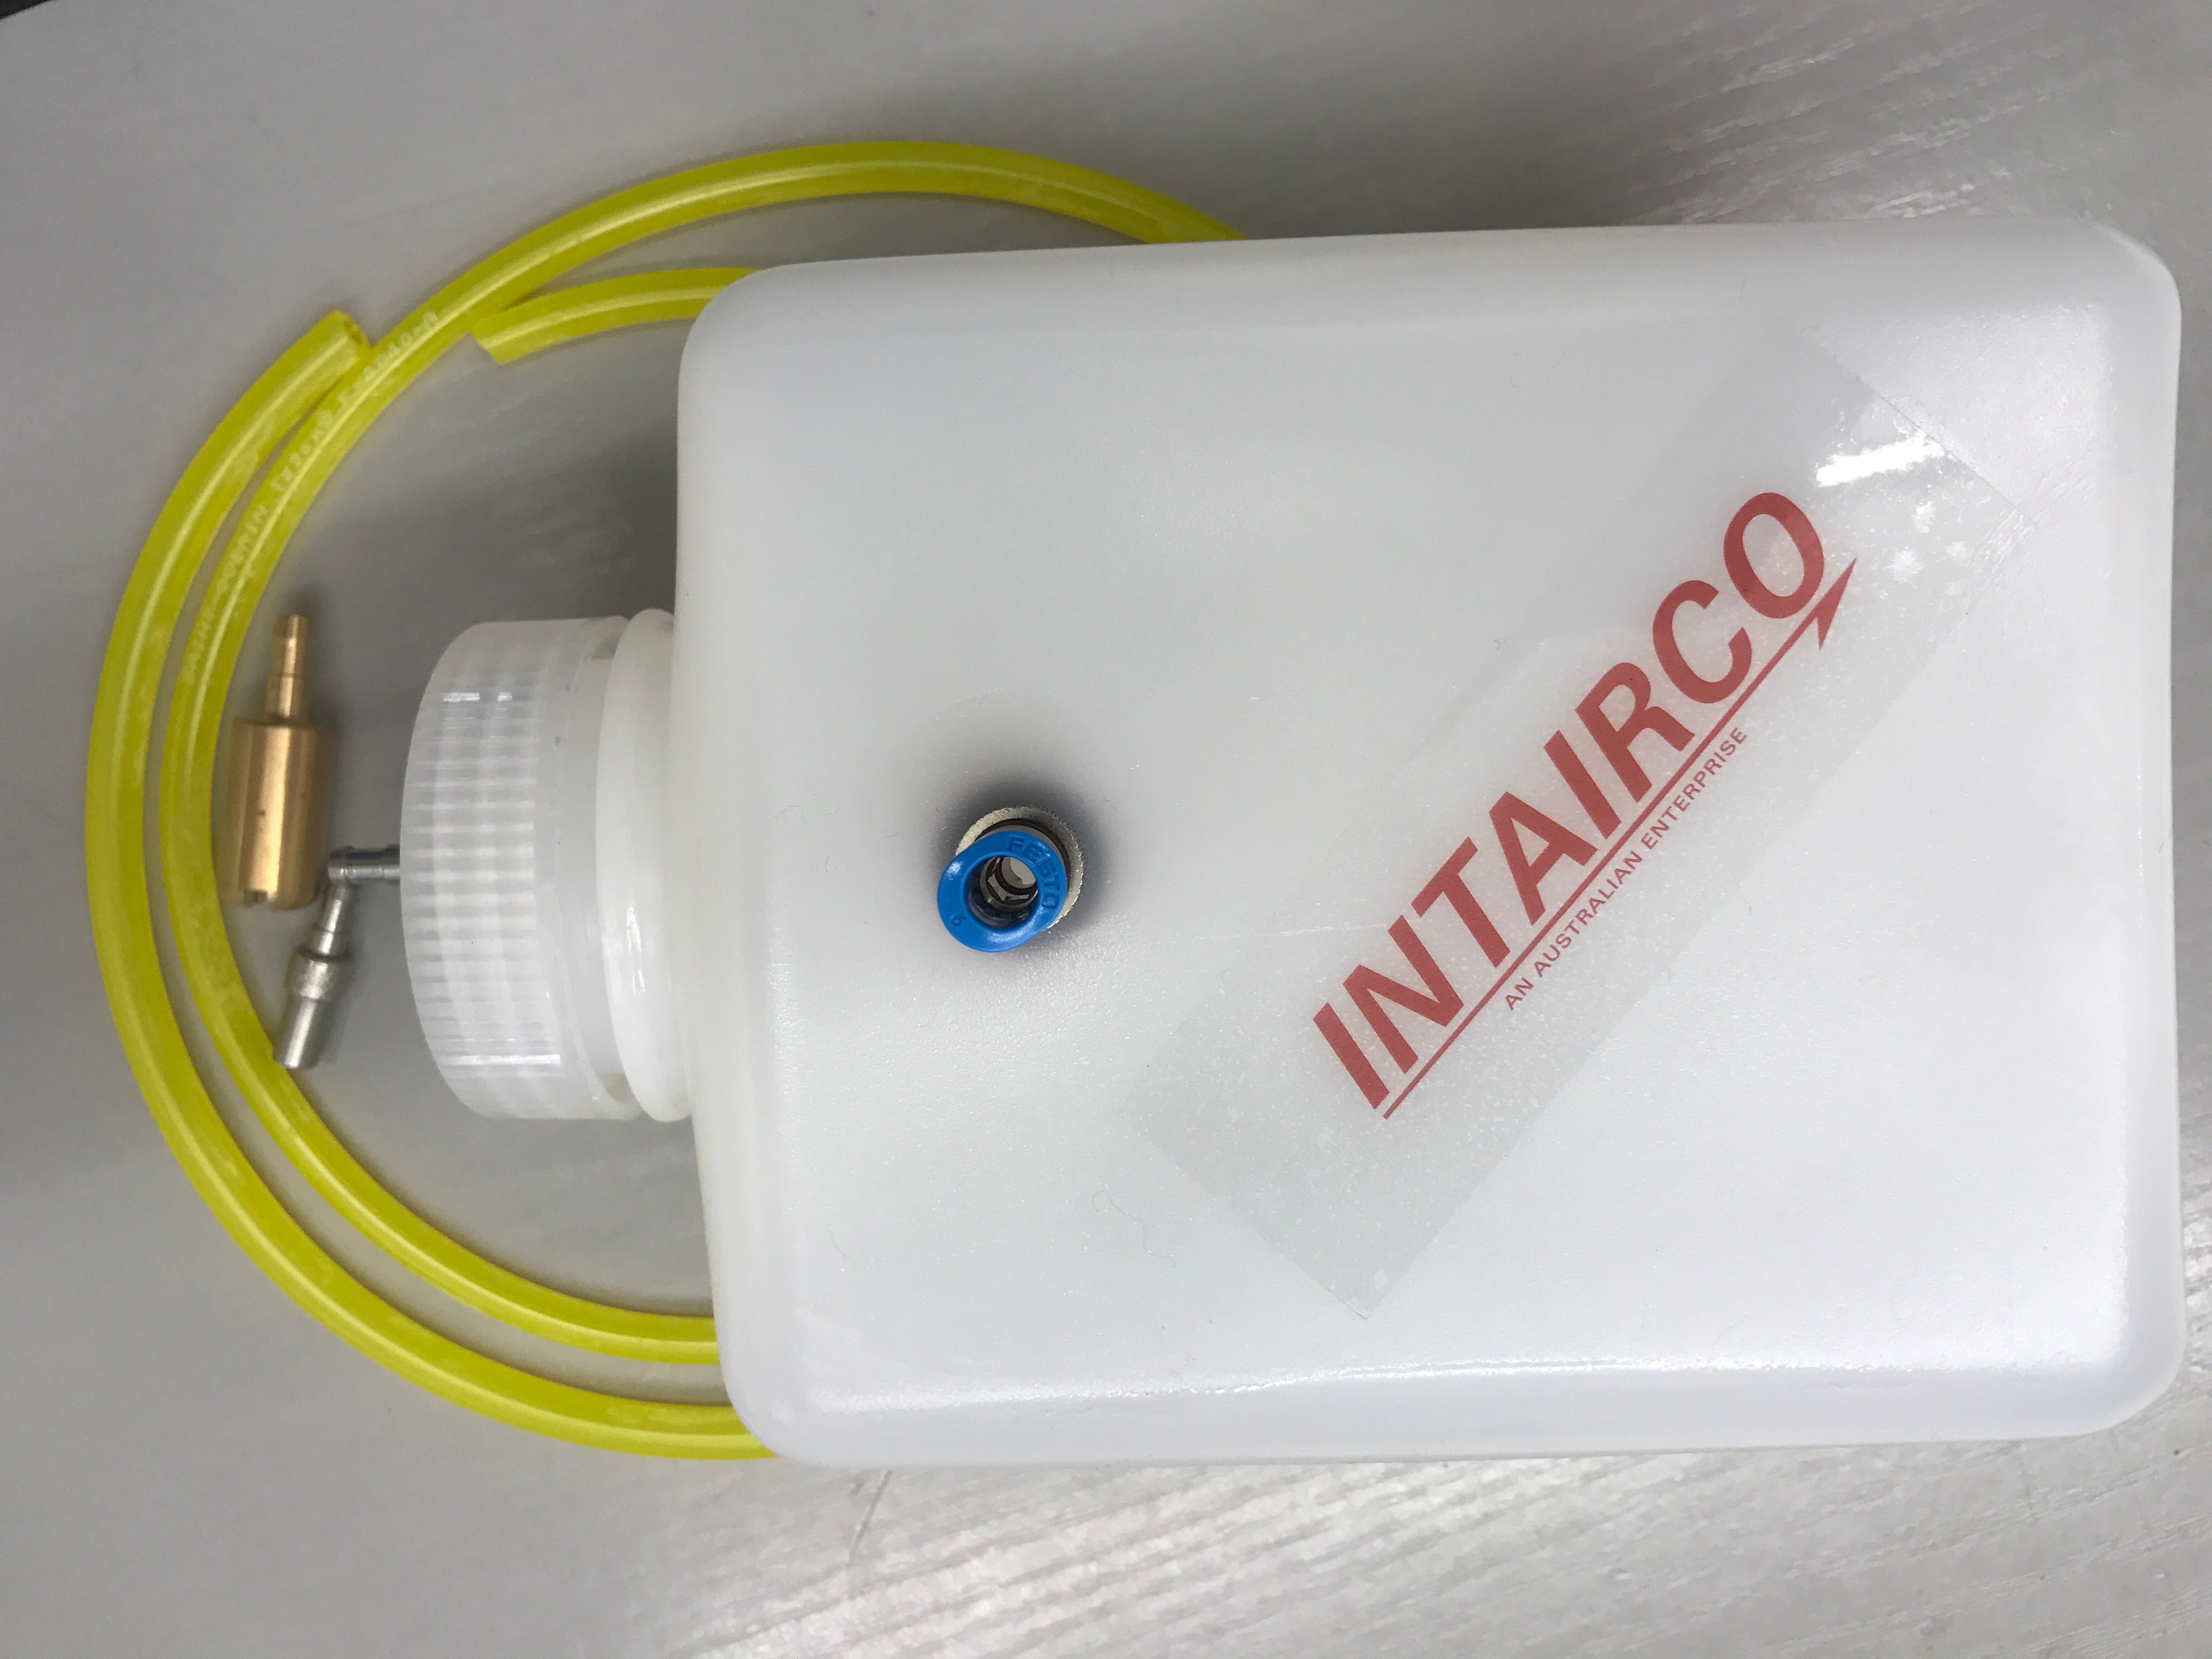 Intairco Overflow / Start / Taxi Tank 1 Litre (32oz) with 6mm Fuel Probe IAC-210